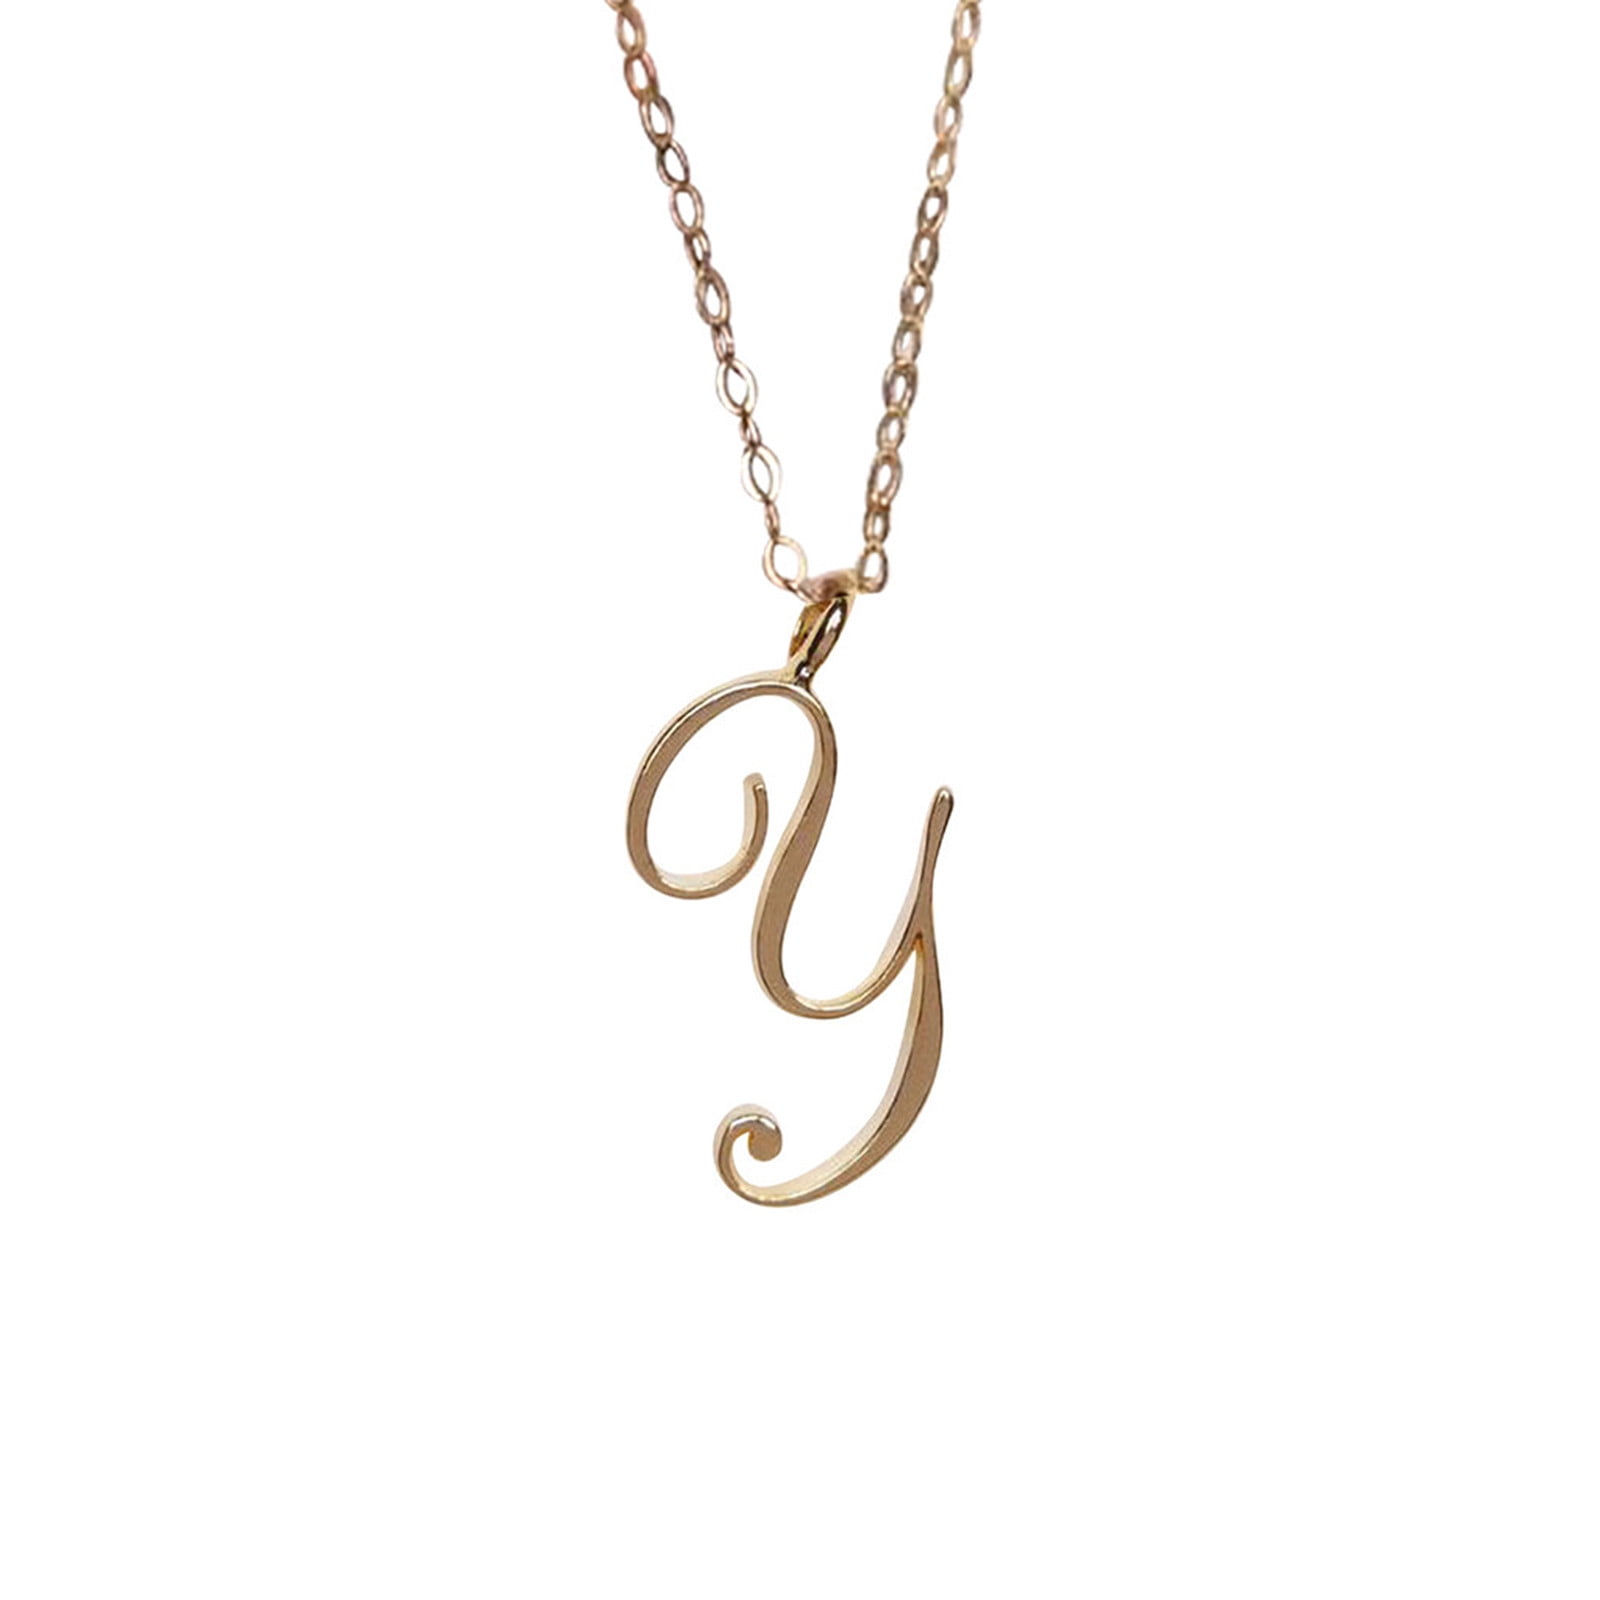 Yubnlvae Necklaces & Pendants Heart Fashion Women's Letter Letters Necklace Chain 26 Circular Double Layer Neck N, Size: One size, Gold